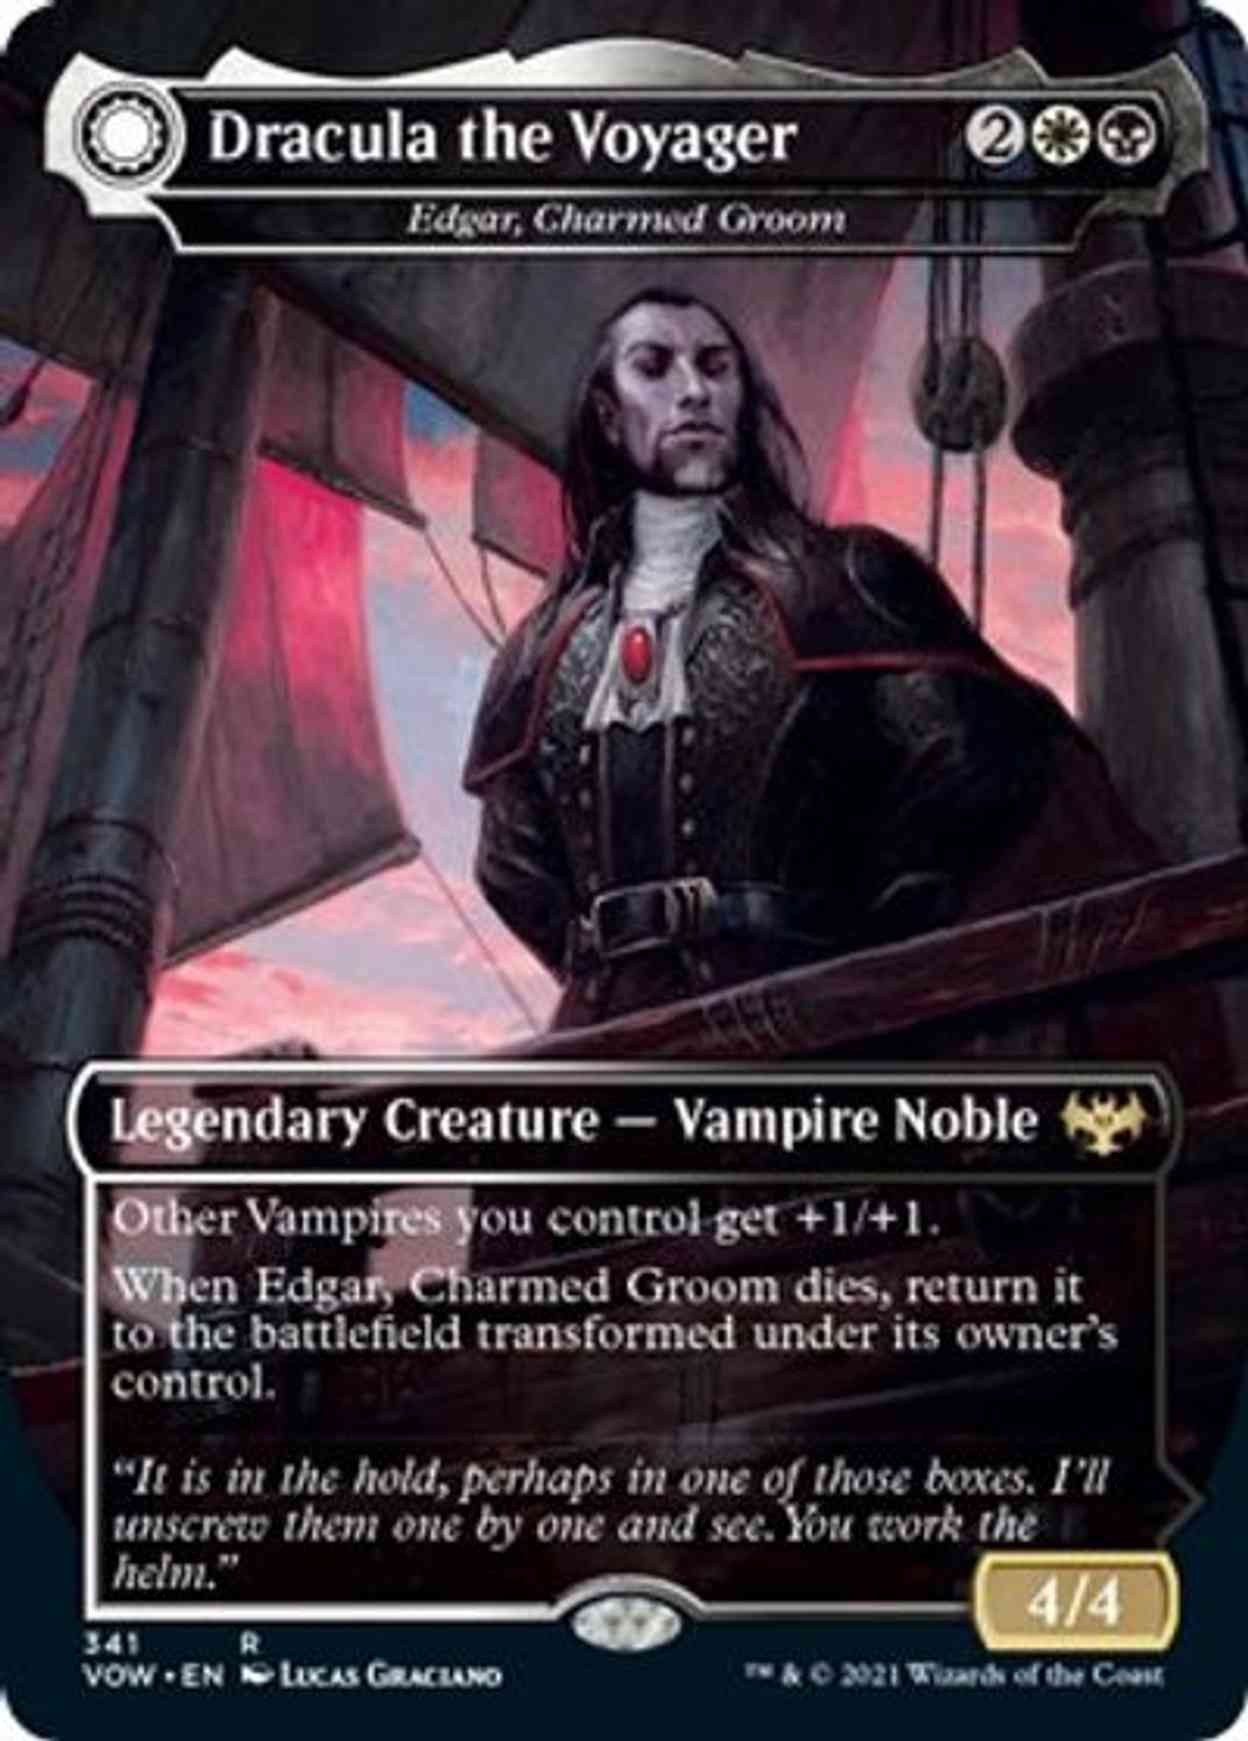 Dracula the Voyager - Edgar, Charmed Groom magic card front